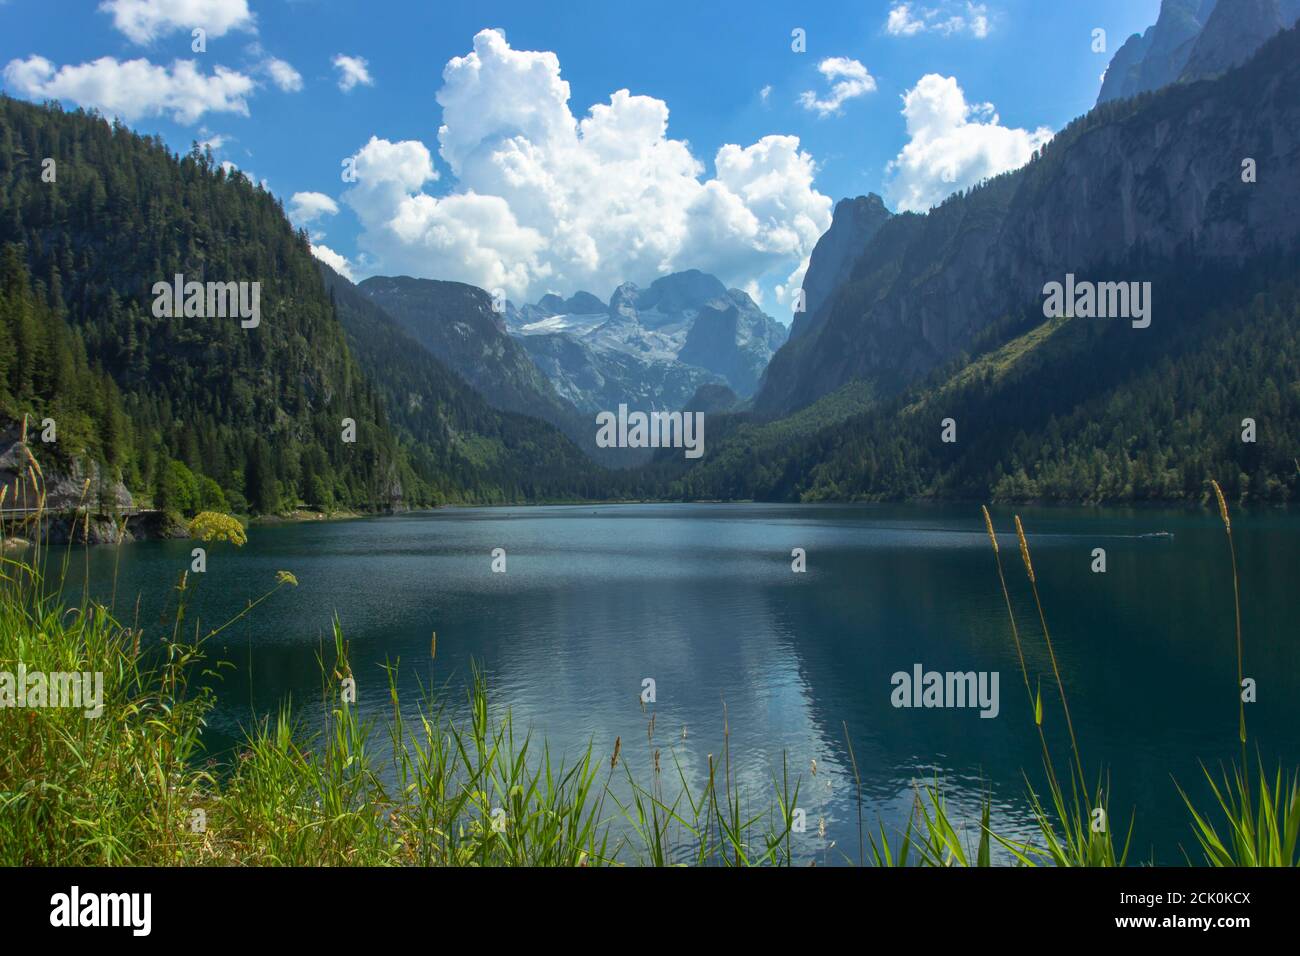 View of majestic mountains and lake.Nature getaway. Turquoise water of Gosau See,lake,Austria,Dachstein glacier in background.Vacation travel scene. Stock Photo